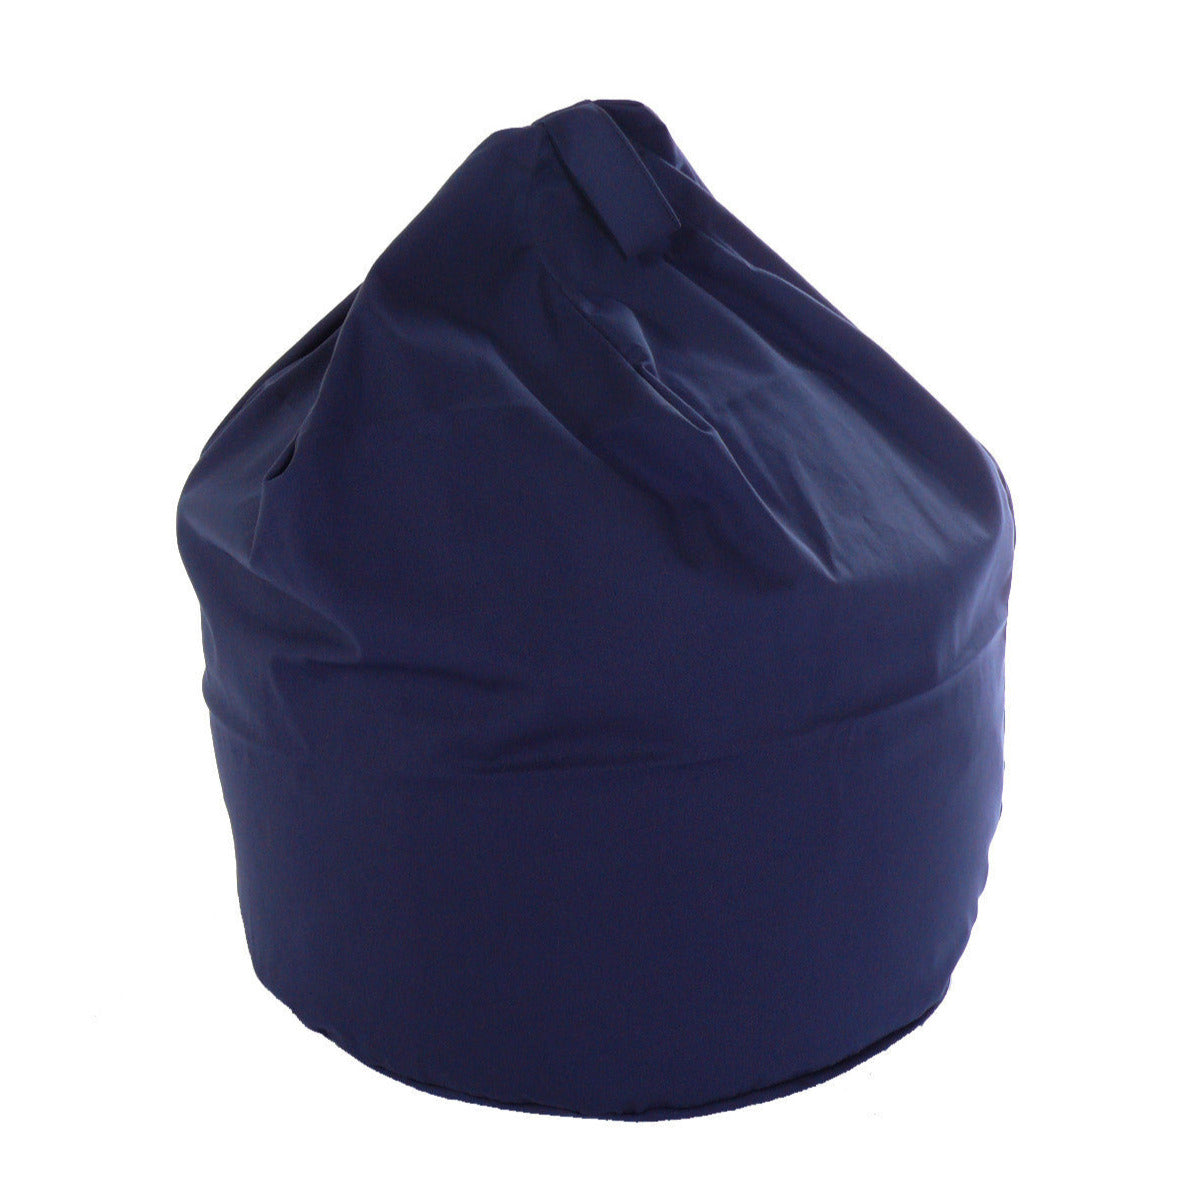 Cotton Twill Navy Blue Bean Bag Large Size